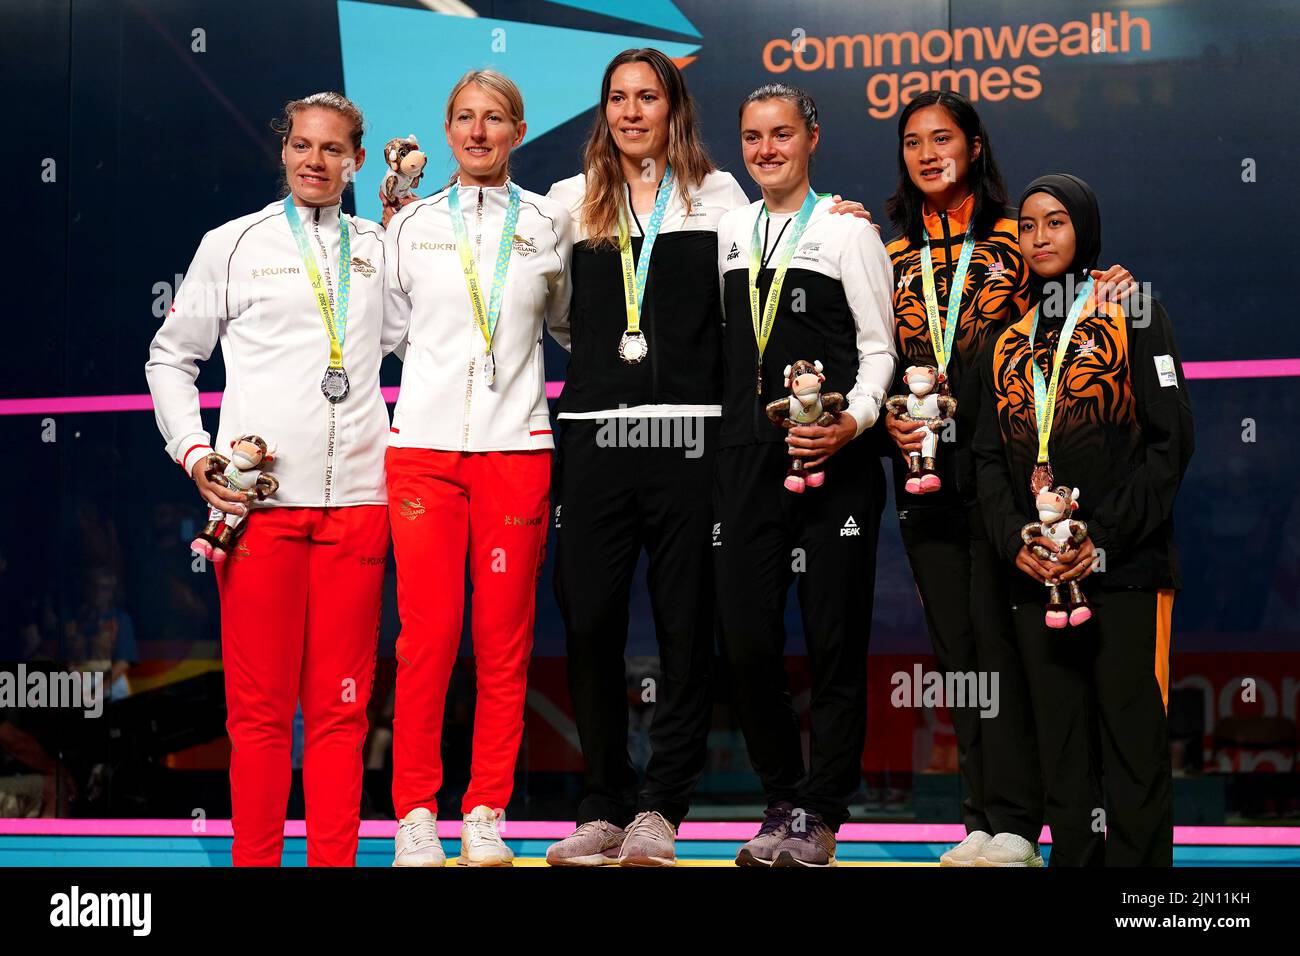 England's Sarah-Jane Perry (left) and Alison Waters with the silver medal, New Zealand's Joelle King and Amanda Landers-Murphy with the gold medal and Malaysia's Rachel Arnold and Aifa Azman with the bronze medal after the Women's Doubles Gold medal match at the University of Birmingham Hockey and Squash Centre on day eleven of the 2022 Commonwealth Games in Birmingham. Picture date: Monday August 8, 2022. Stock Photo